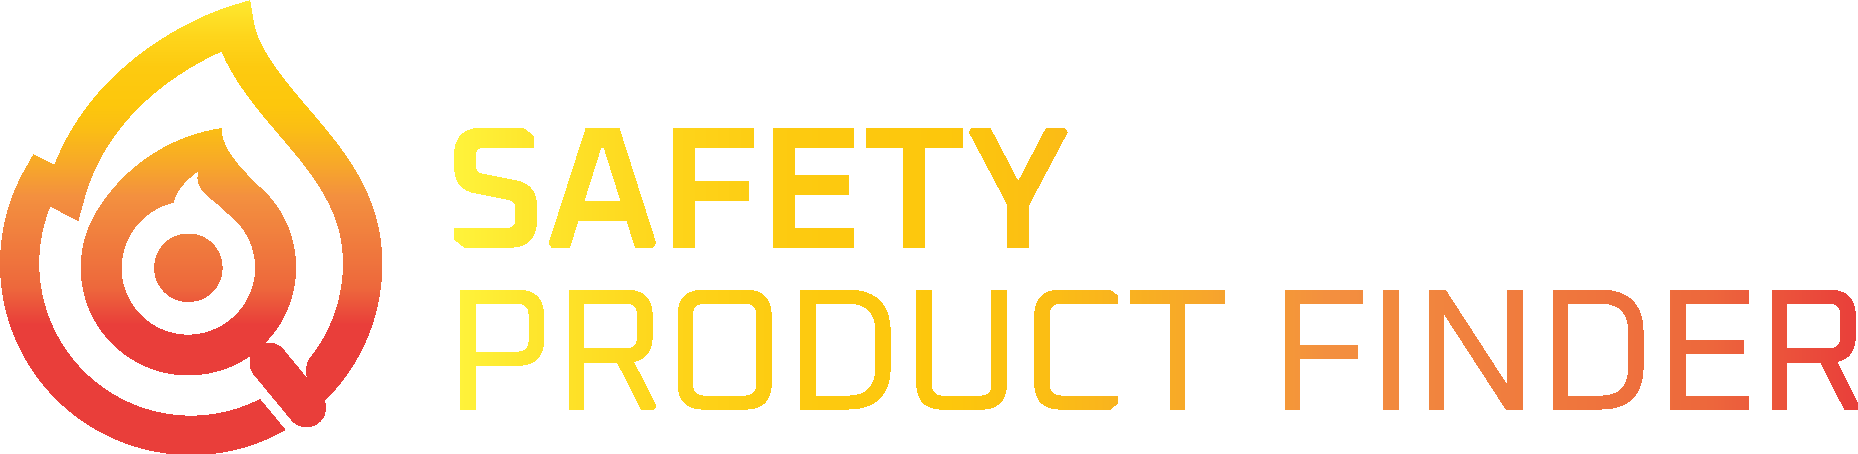 Safety Product Finde Logo Vector